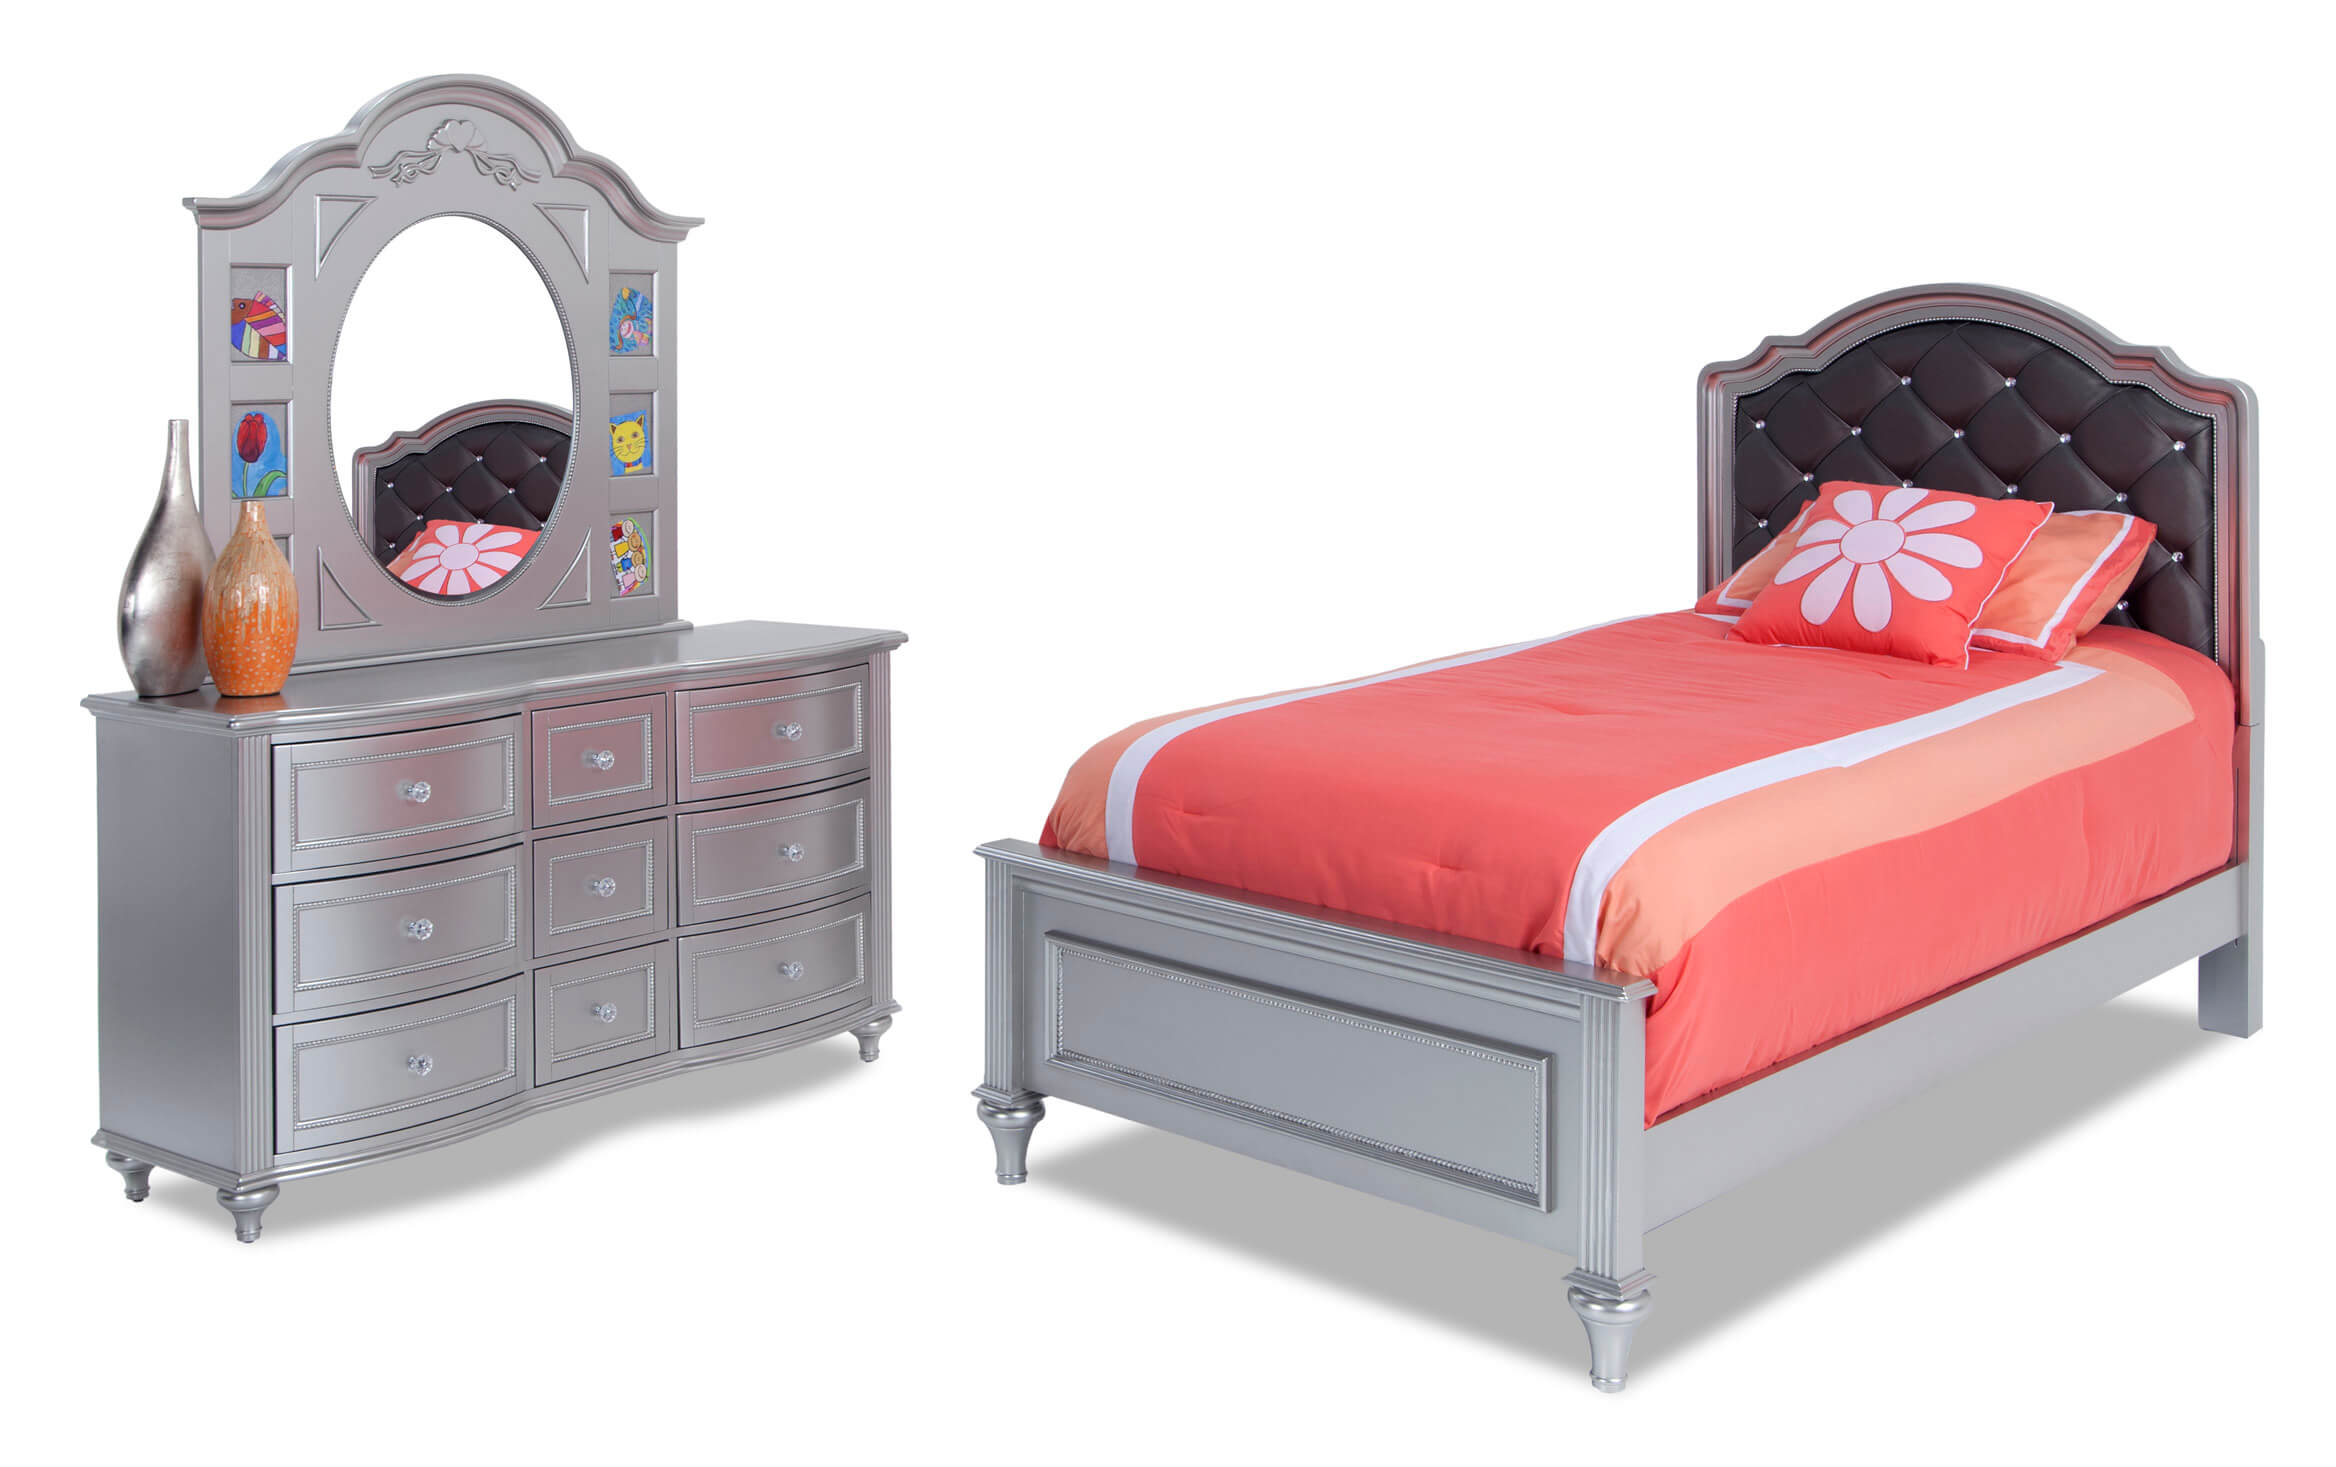 little girl twin bed sets